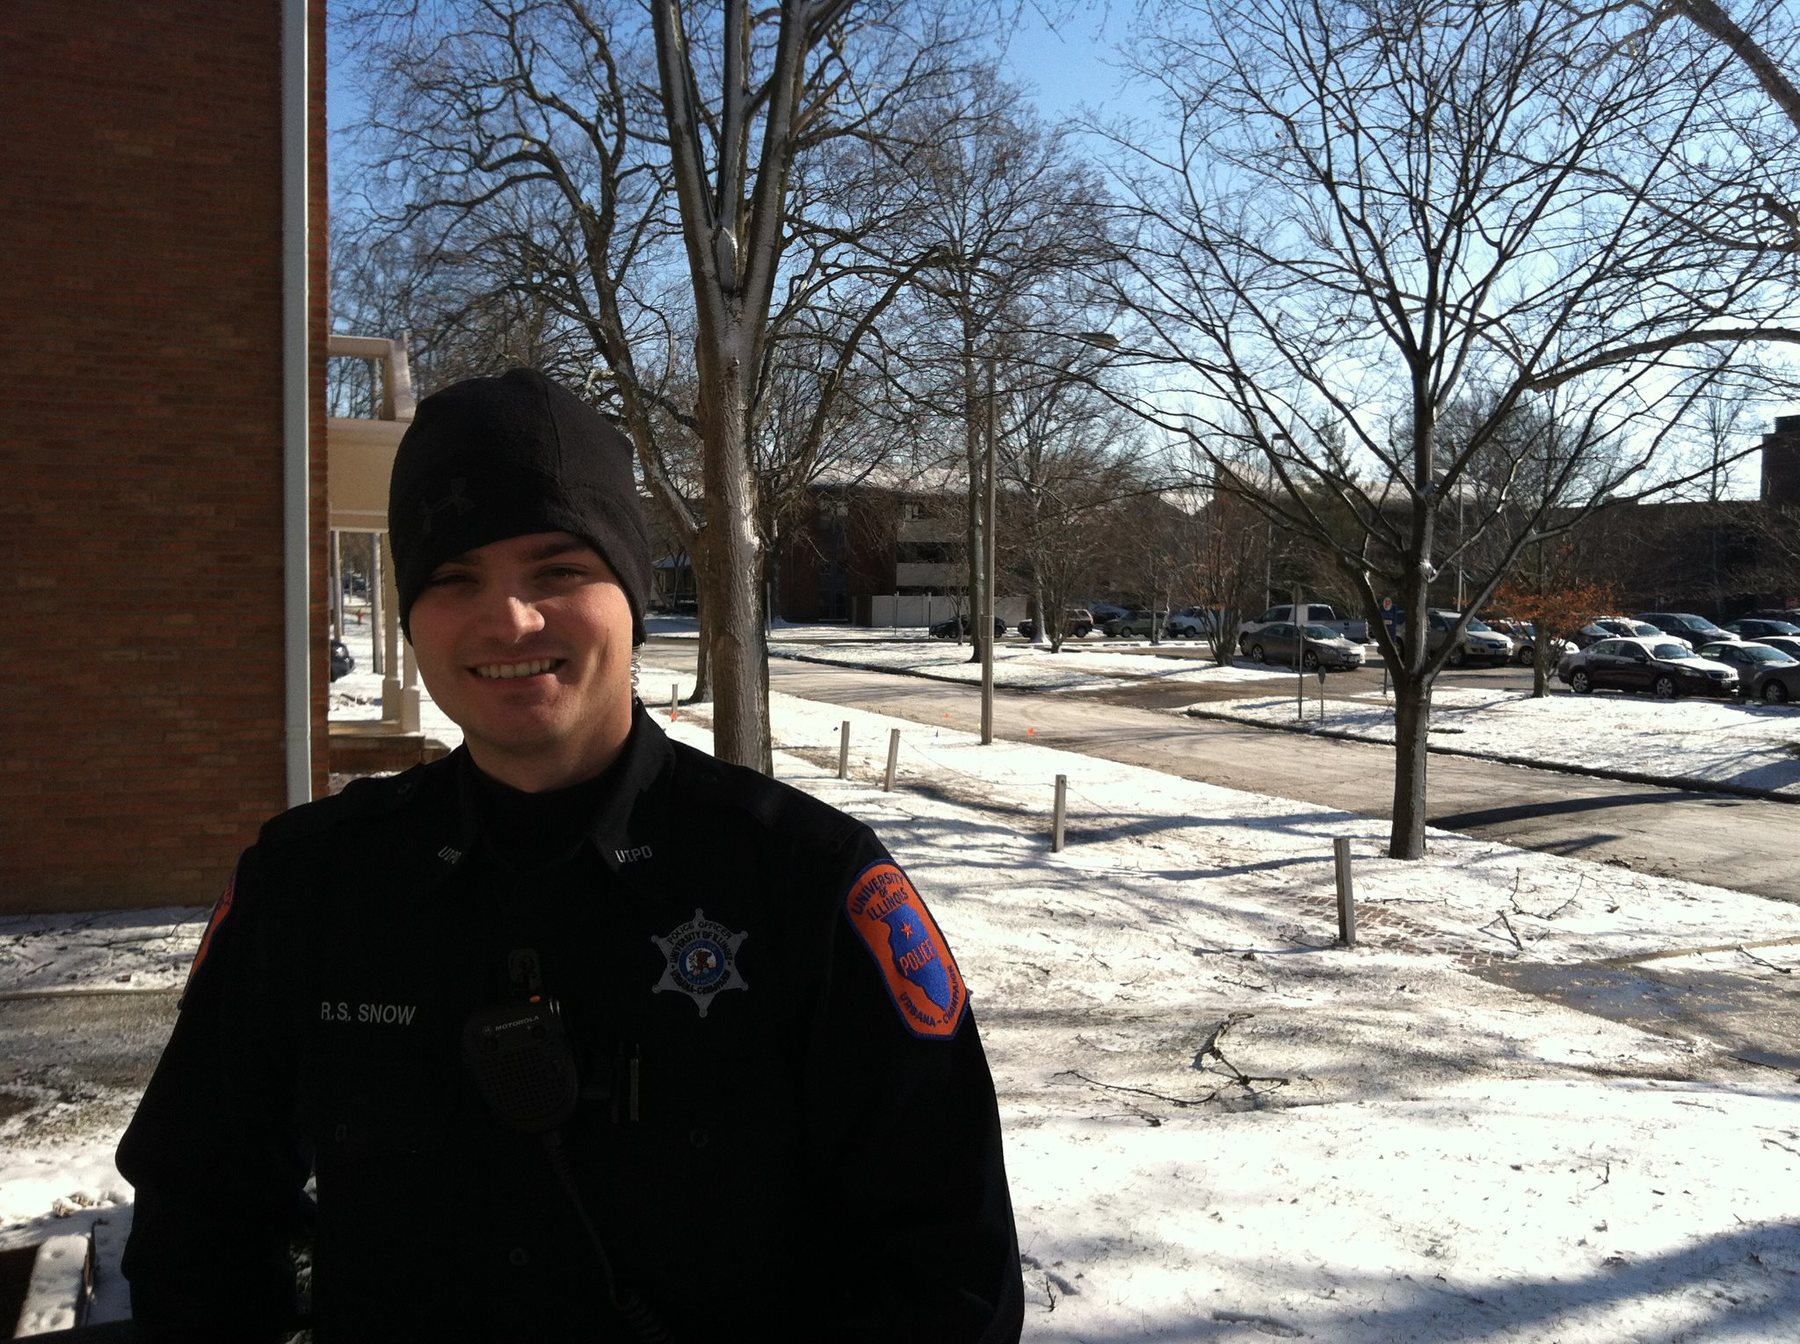 Officer Ryan Snow in the snow.